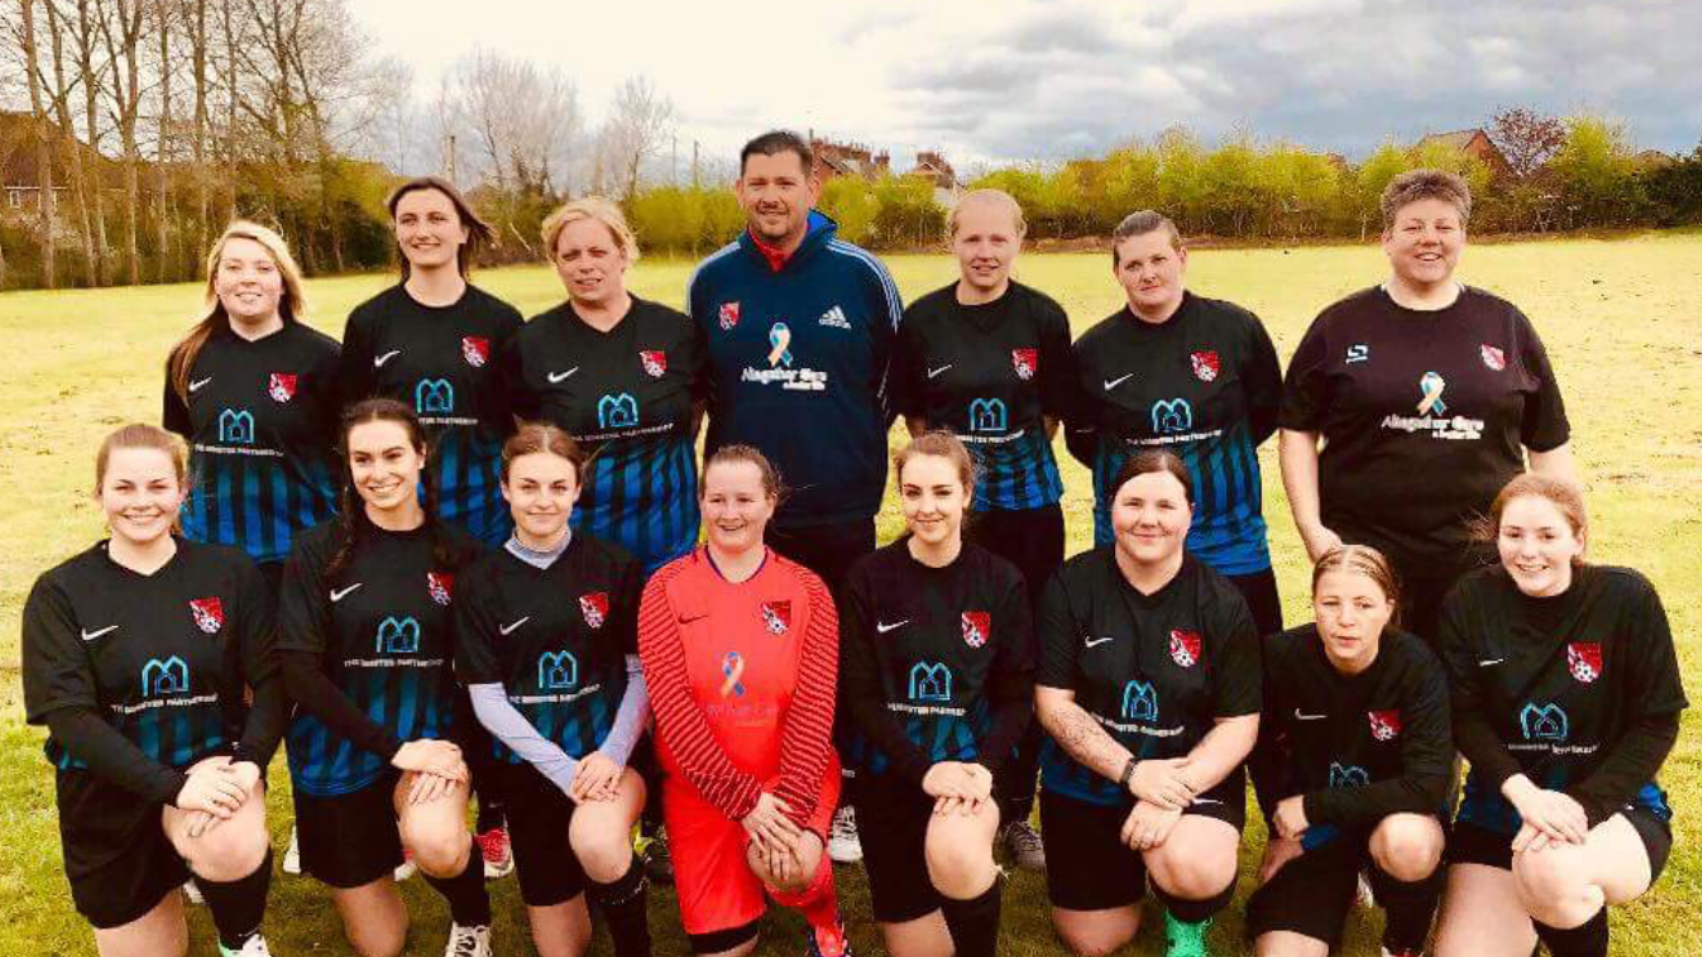 Verwood Ladies Football Team goes from strength to strength